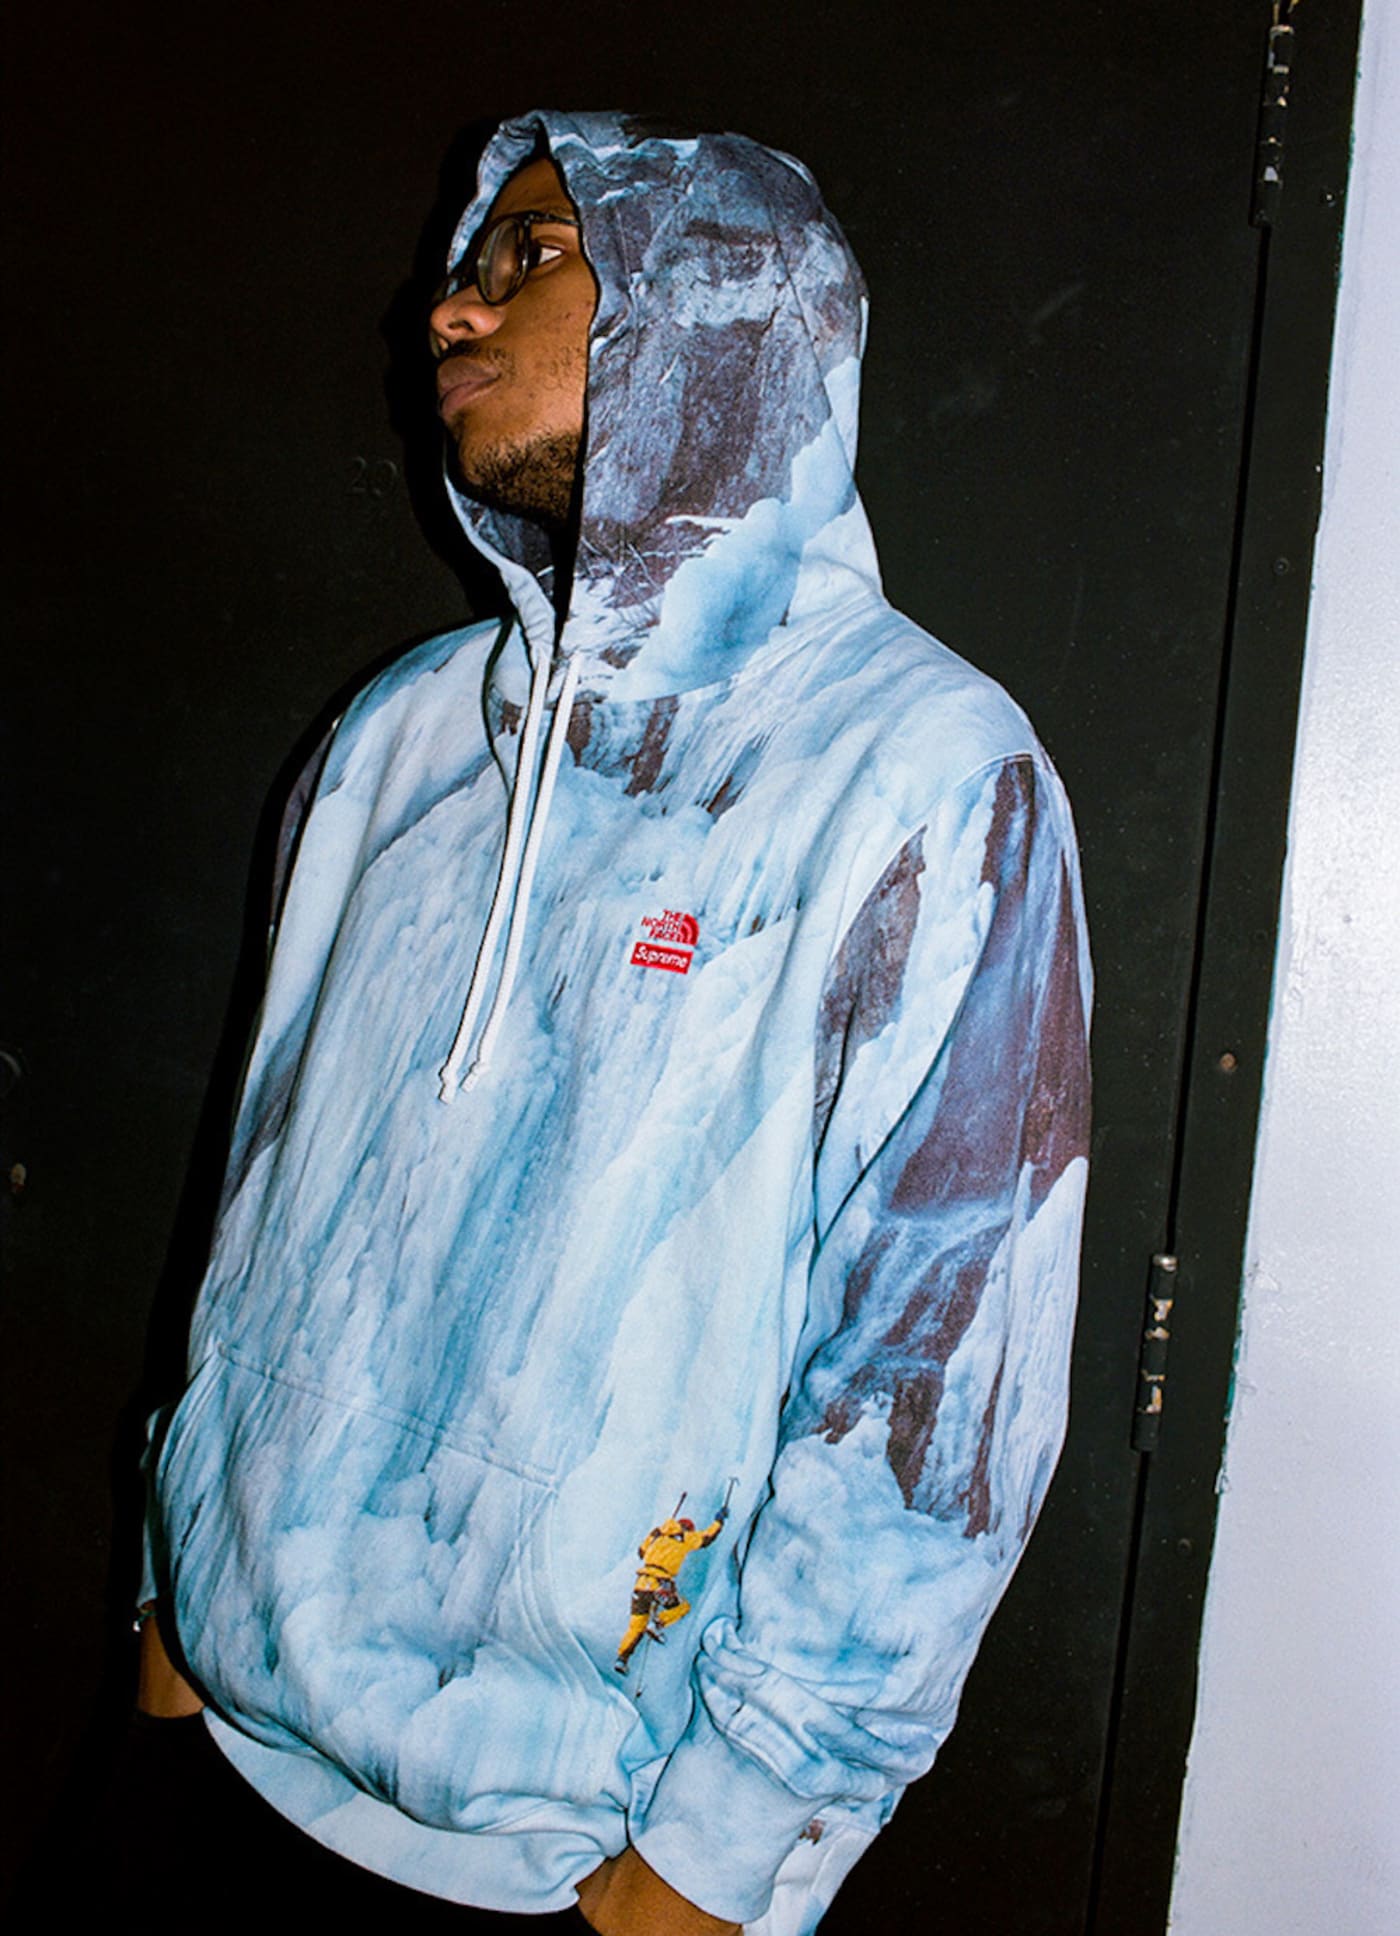 the north face supreme hoodie